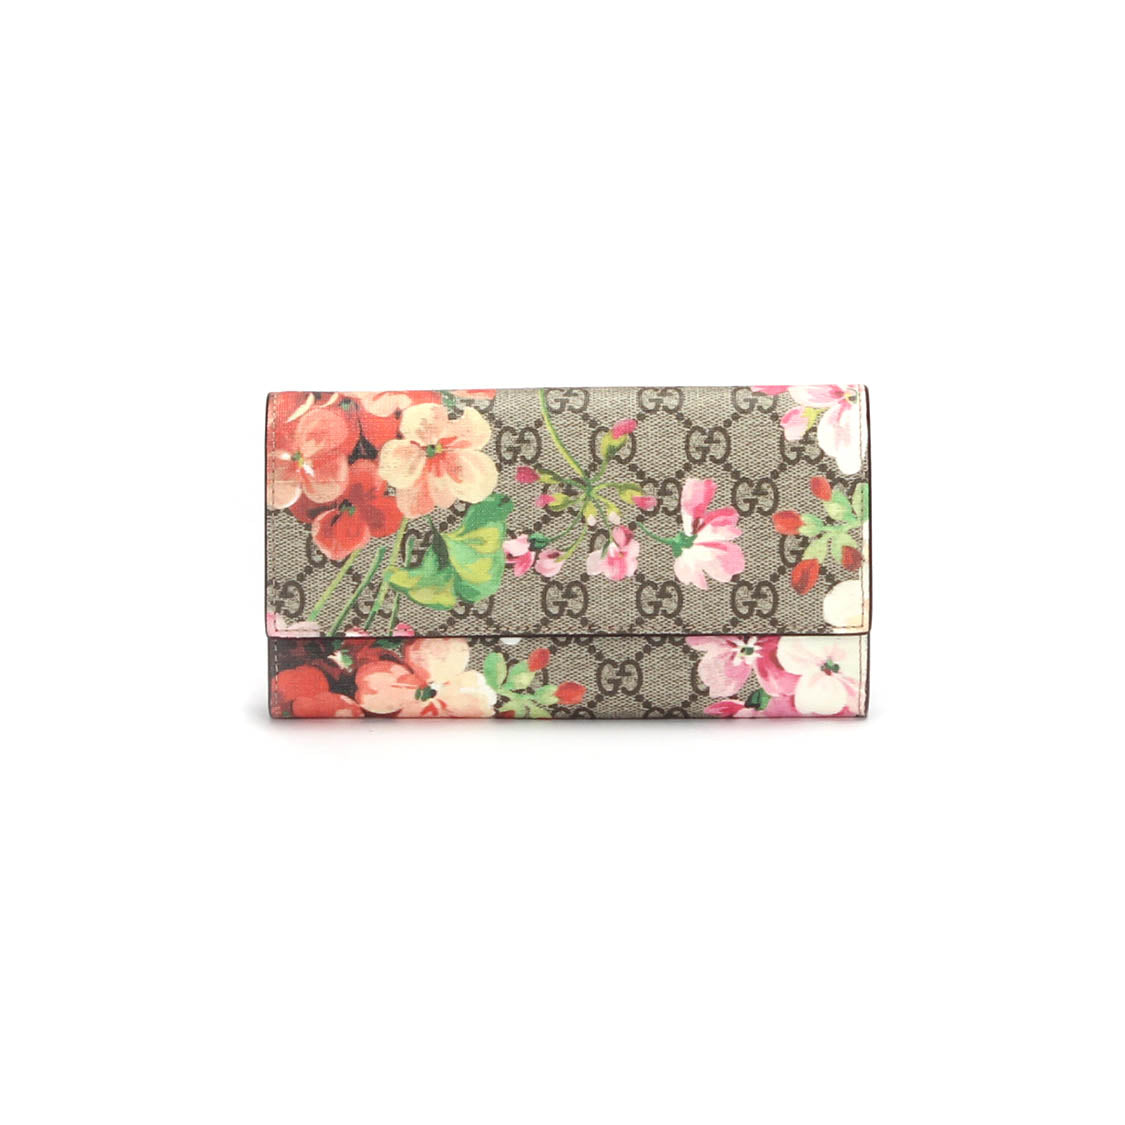 GG Supreme Blooms Continental Wallet 404070